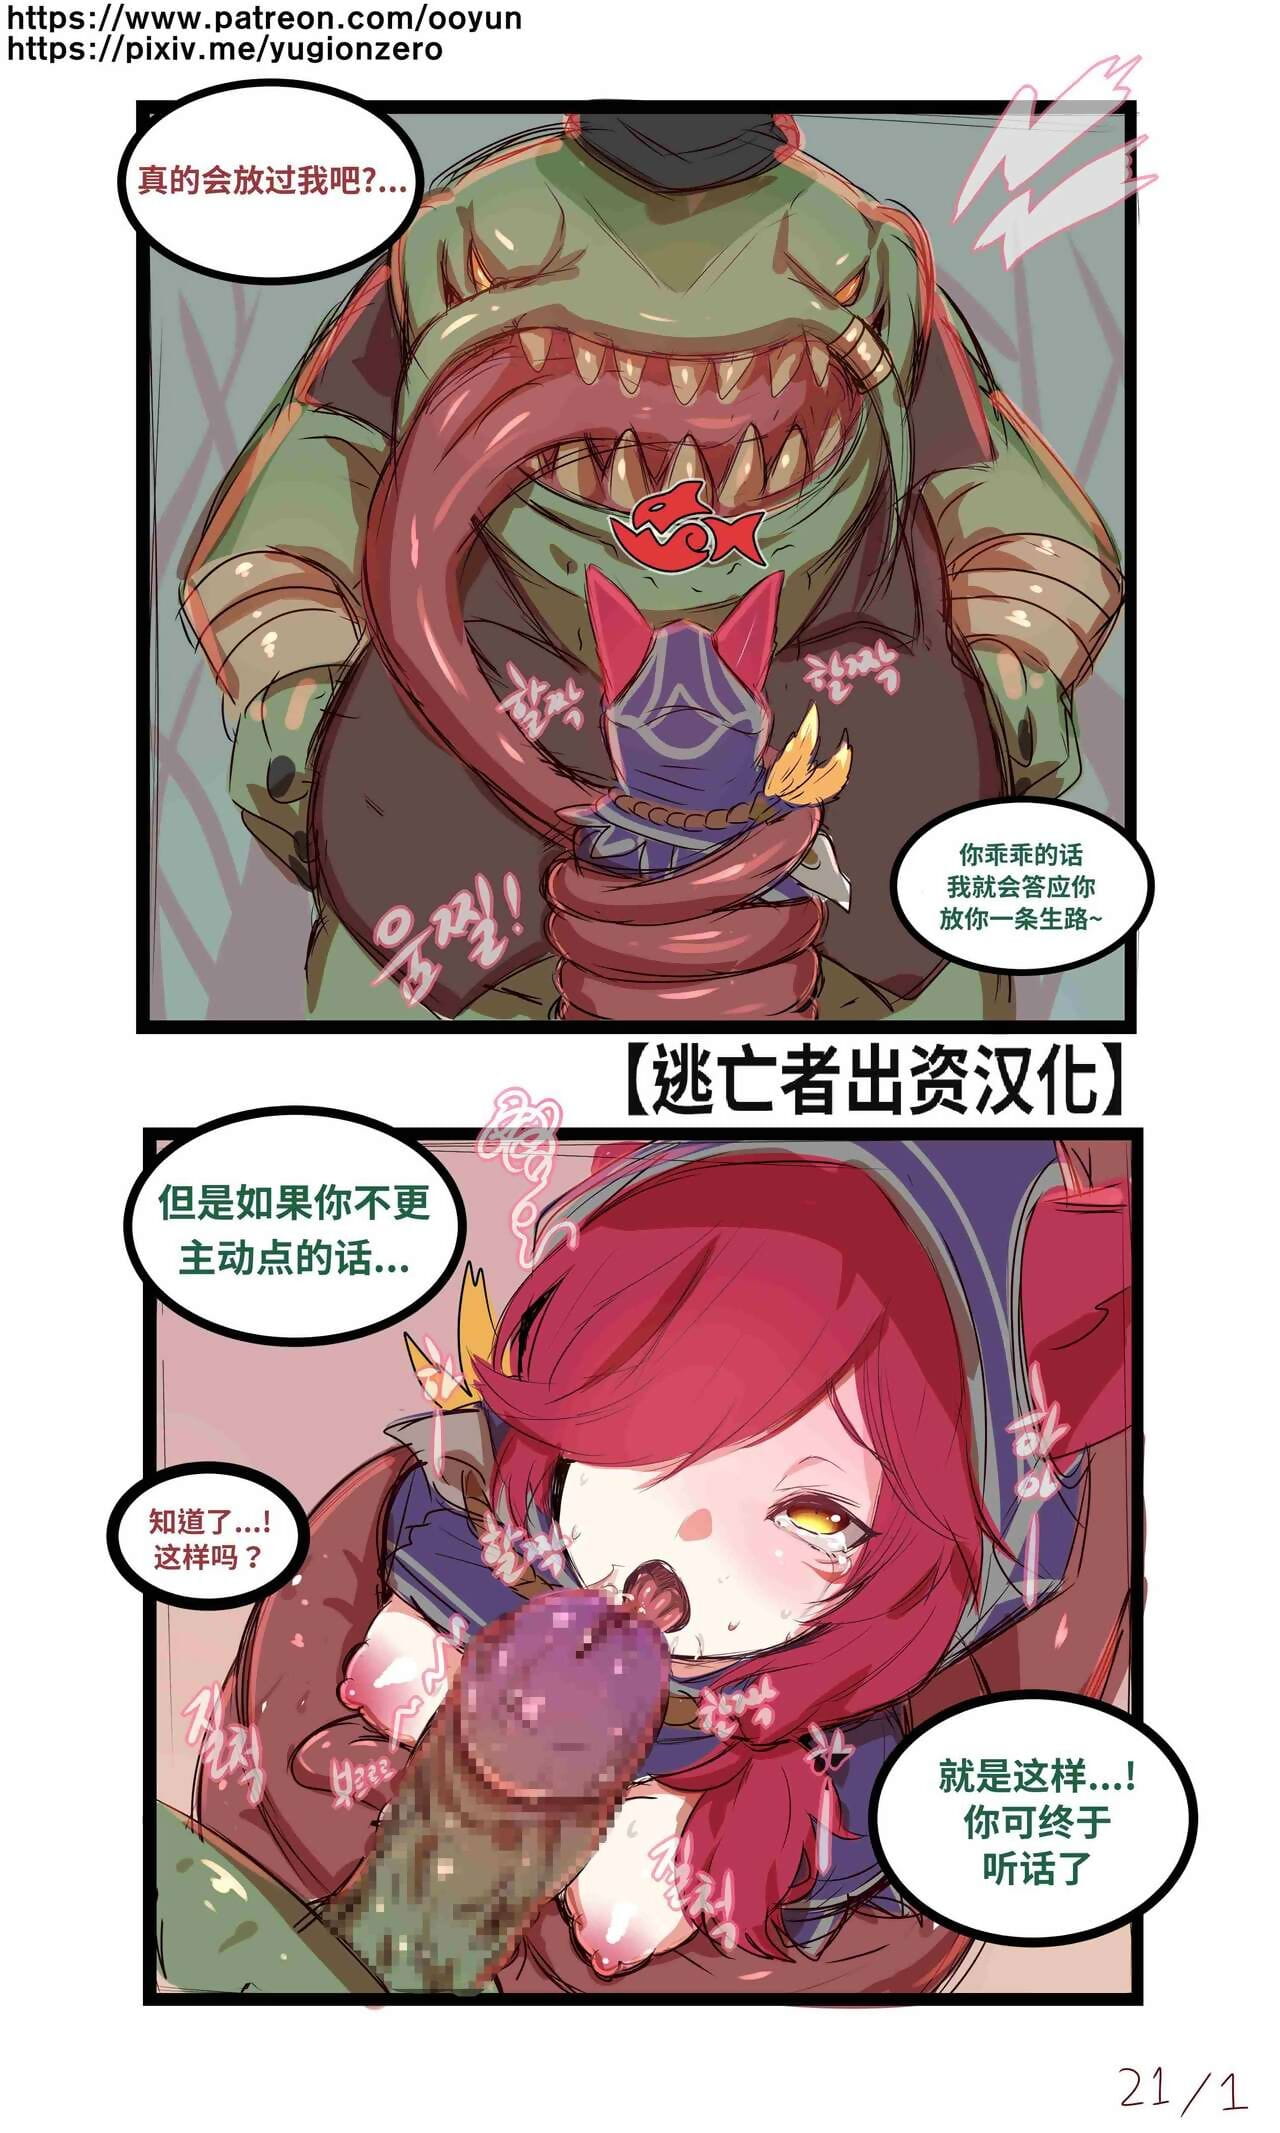 yun-uyeon ooyun League_of_legends League of Legends Chinese 猫语汉化组